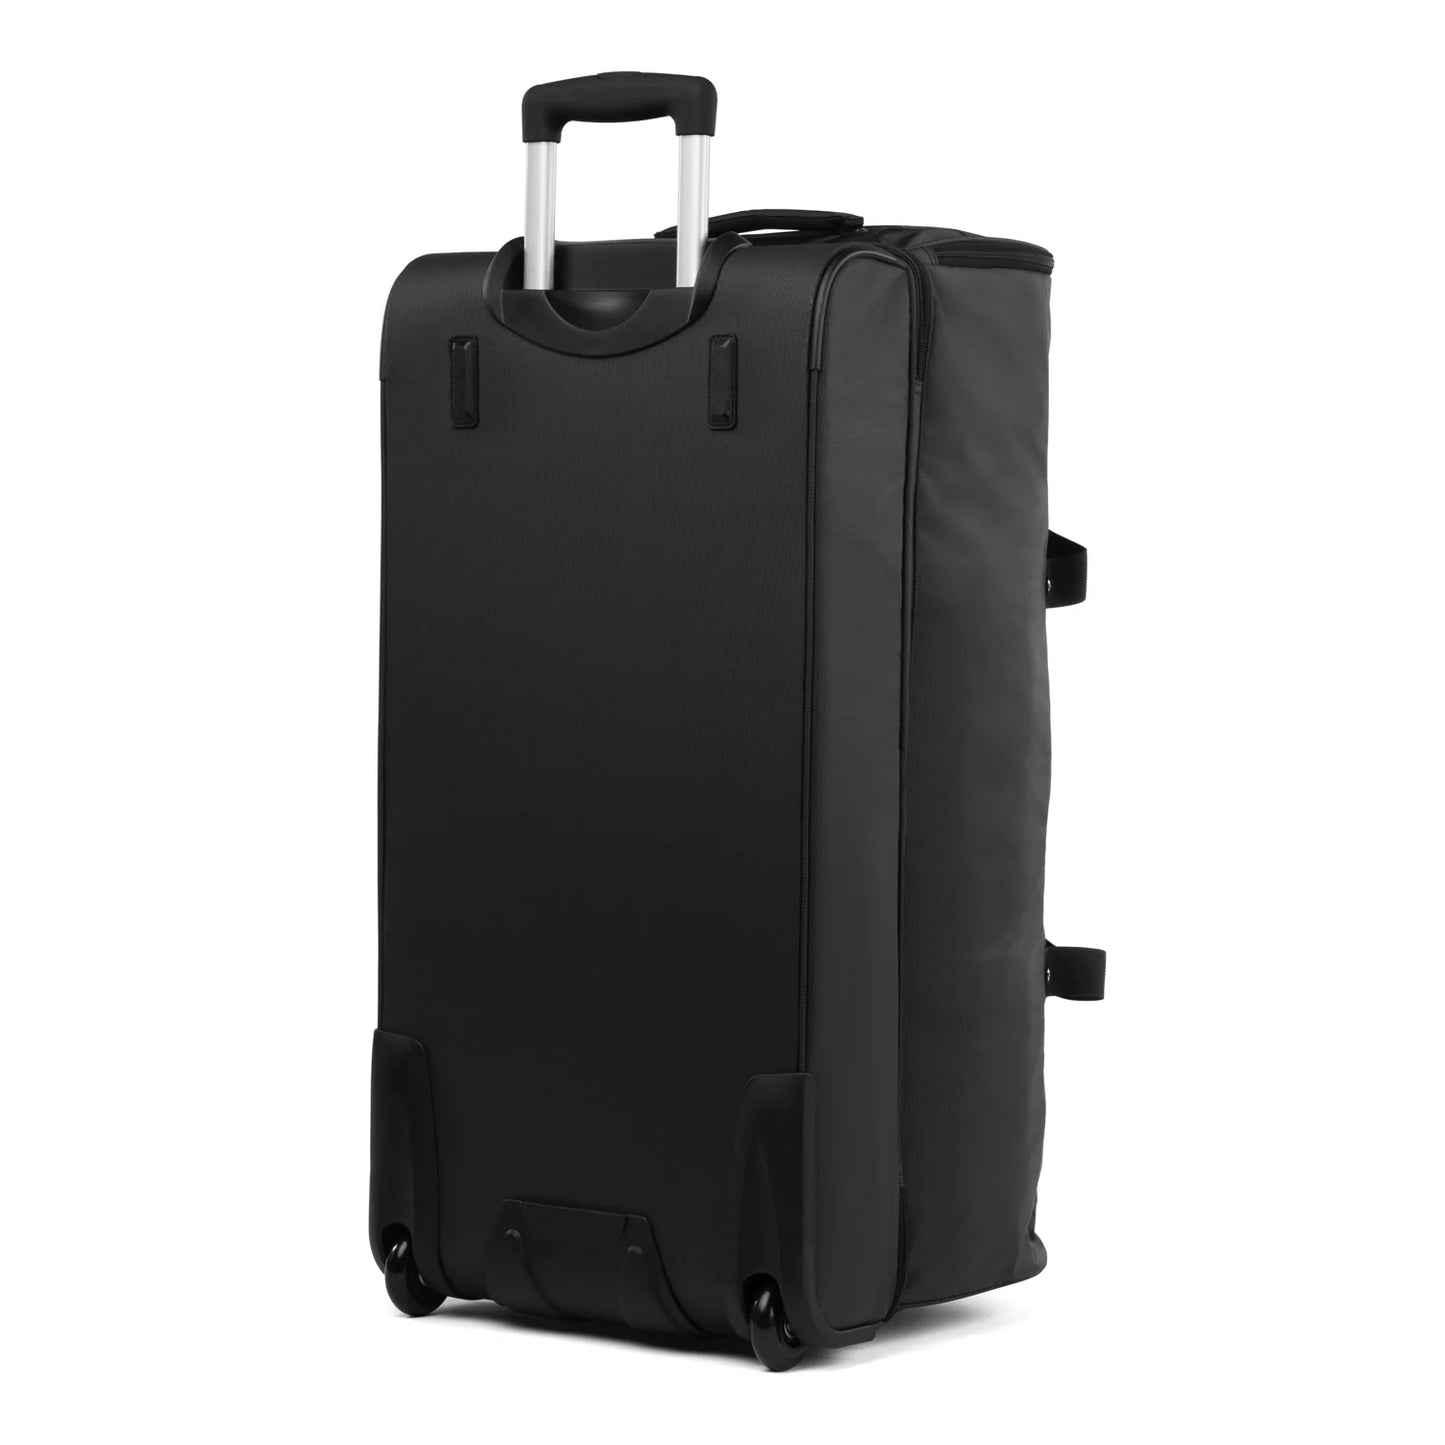 Final Sale- Travelpro Roadtrip 30" Drop-Bottom Rolling Duffel with Packing Cubes- 4152130